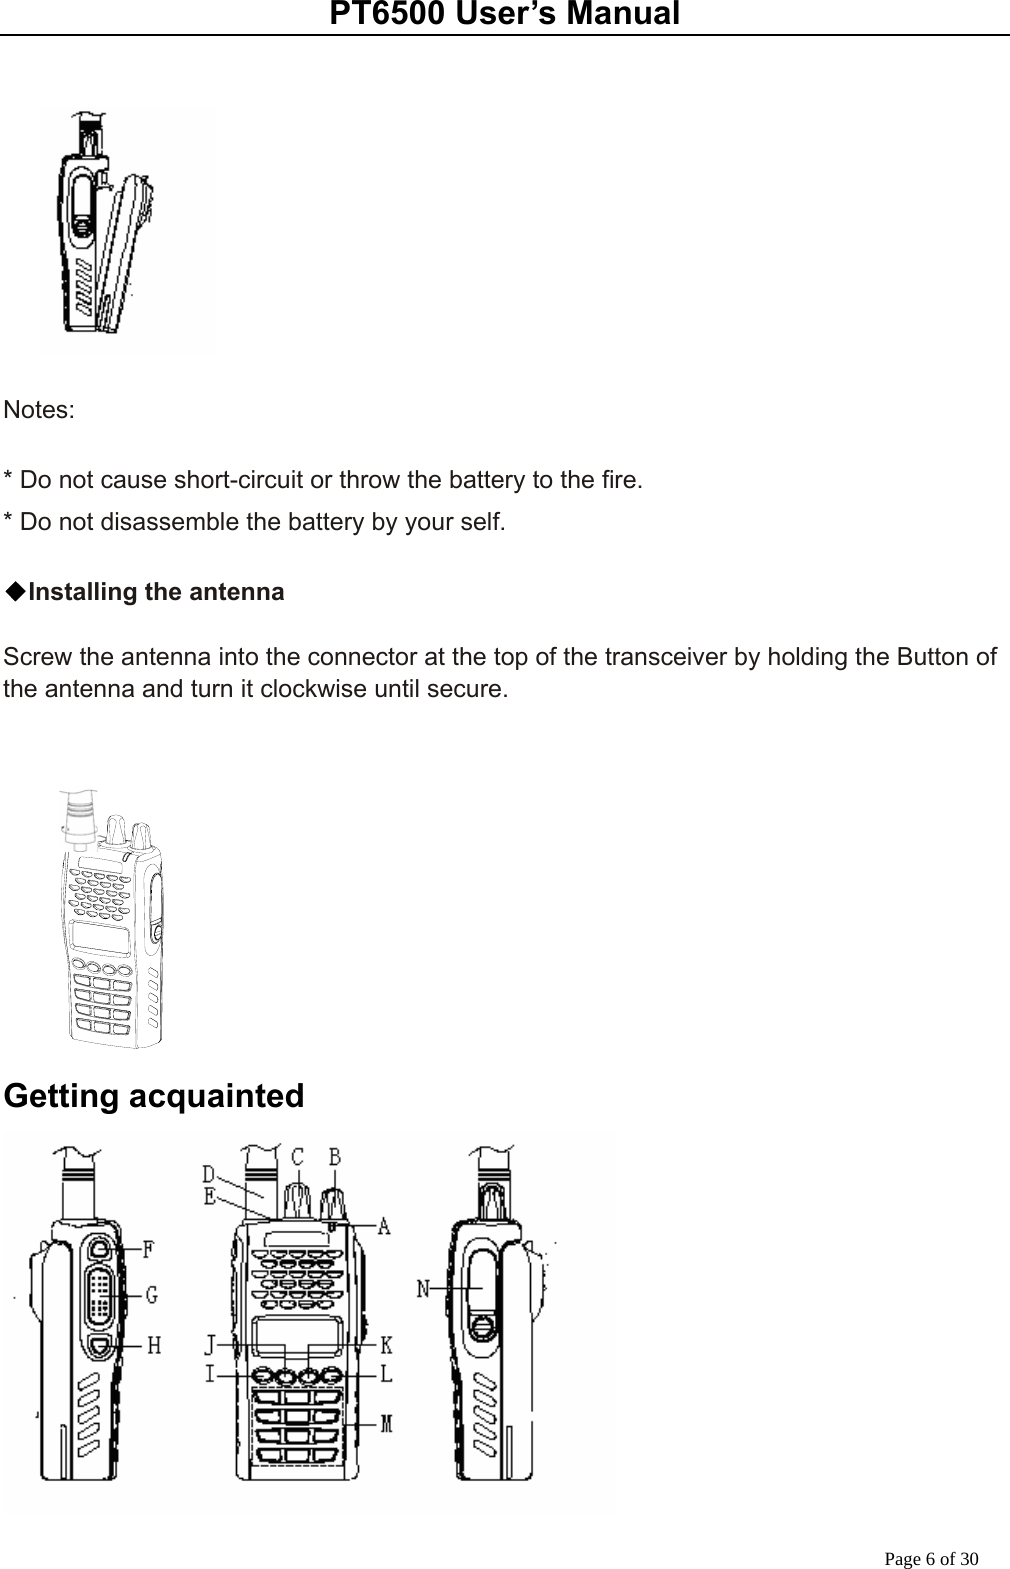 PT6500 User’s Manual Page 6 of 30     Notes:  * Do not cause short-circuit or throw the battery to the fire. * Do not disassemble the battery by your self.  ◆Installing the antenna  Screw the antenna into the connector at the top of the transceiver by holding the Button of the antenna and turn it clockwise until secure.     Getting acquainted  